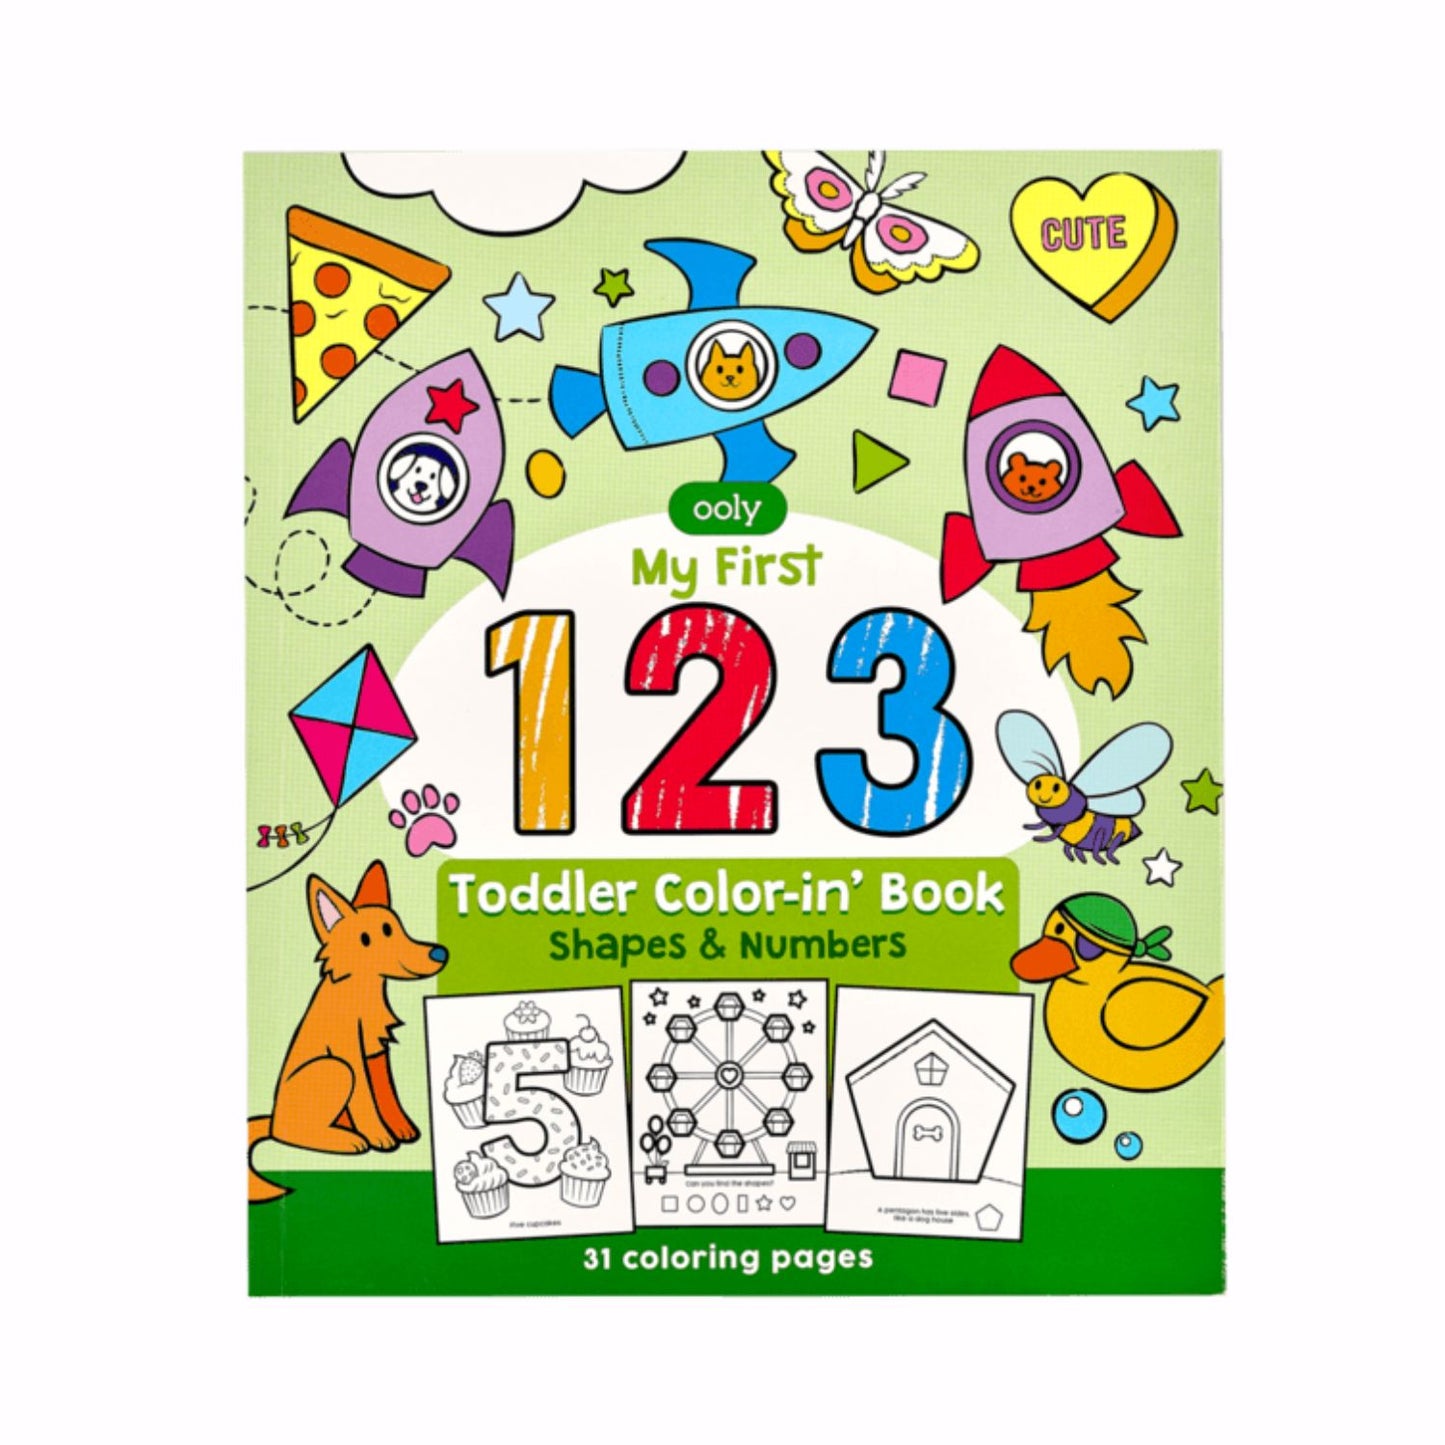 OOLY Toddler Coloring Book - 123 Shapes & Numbers